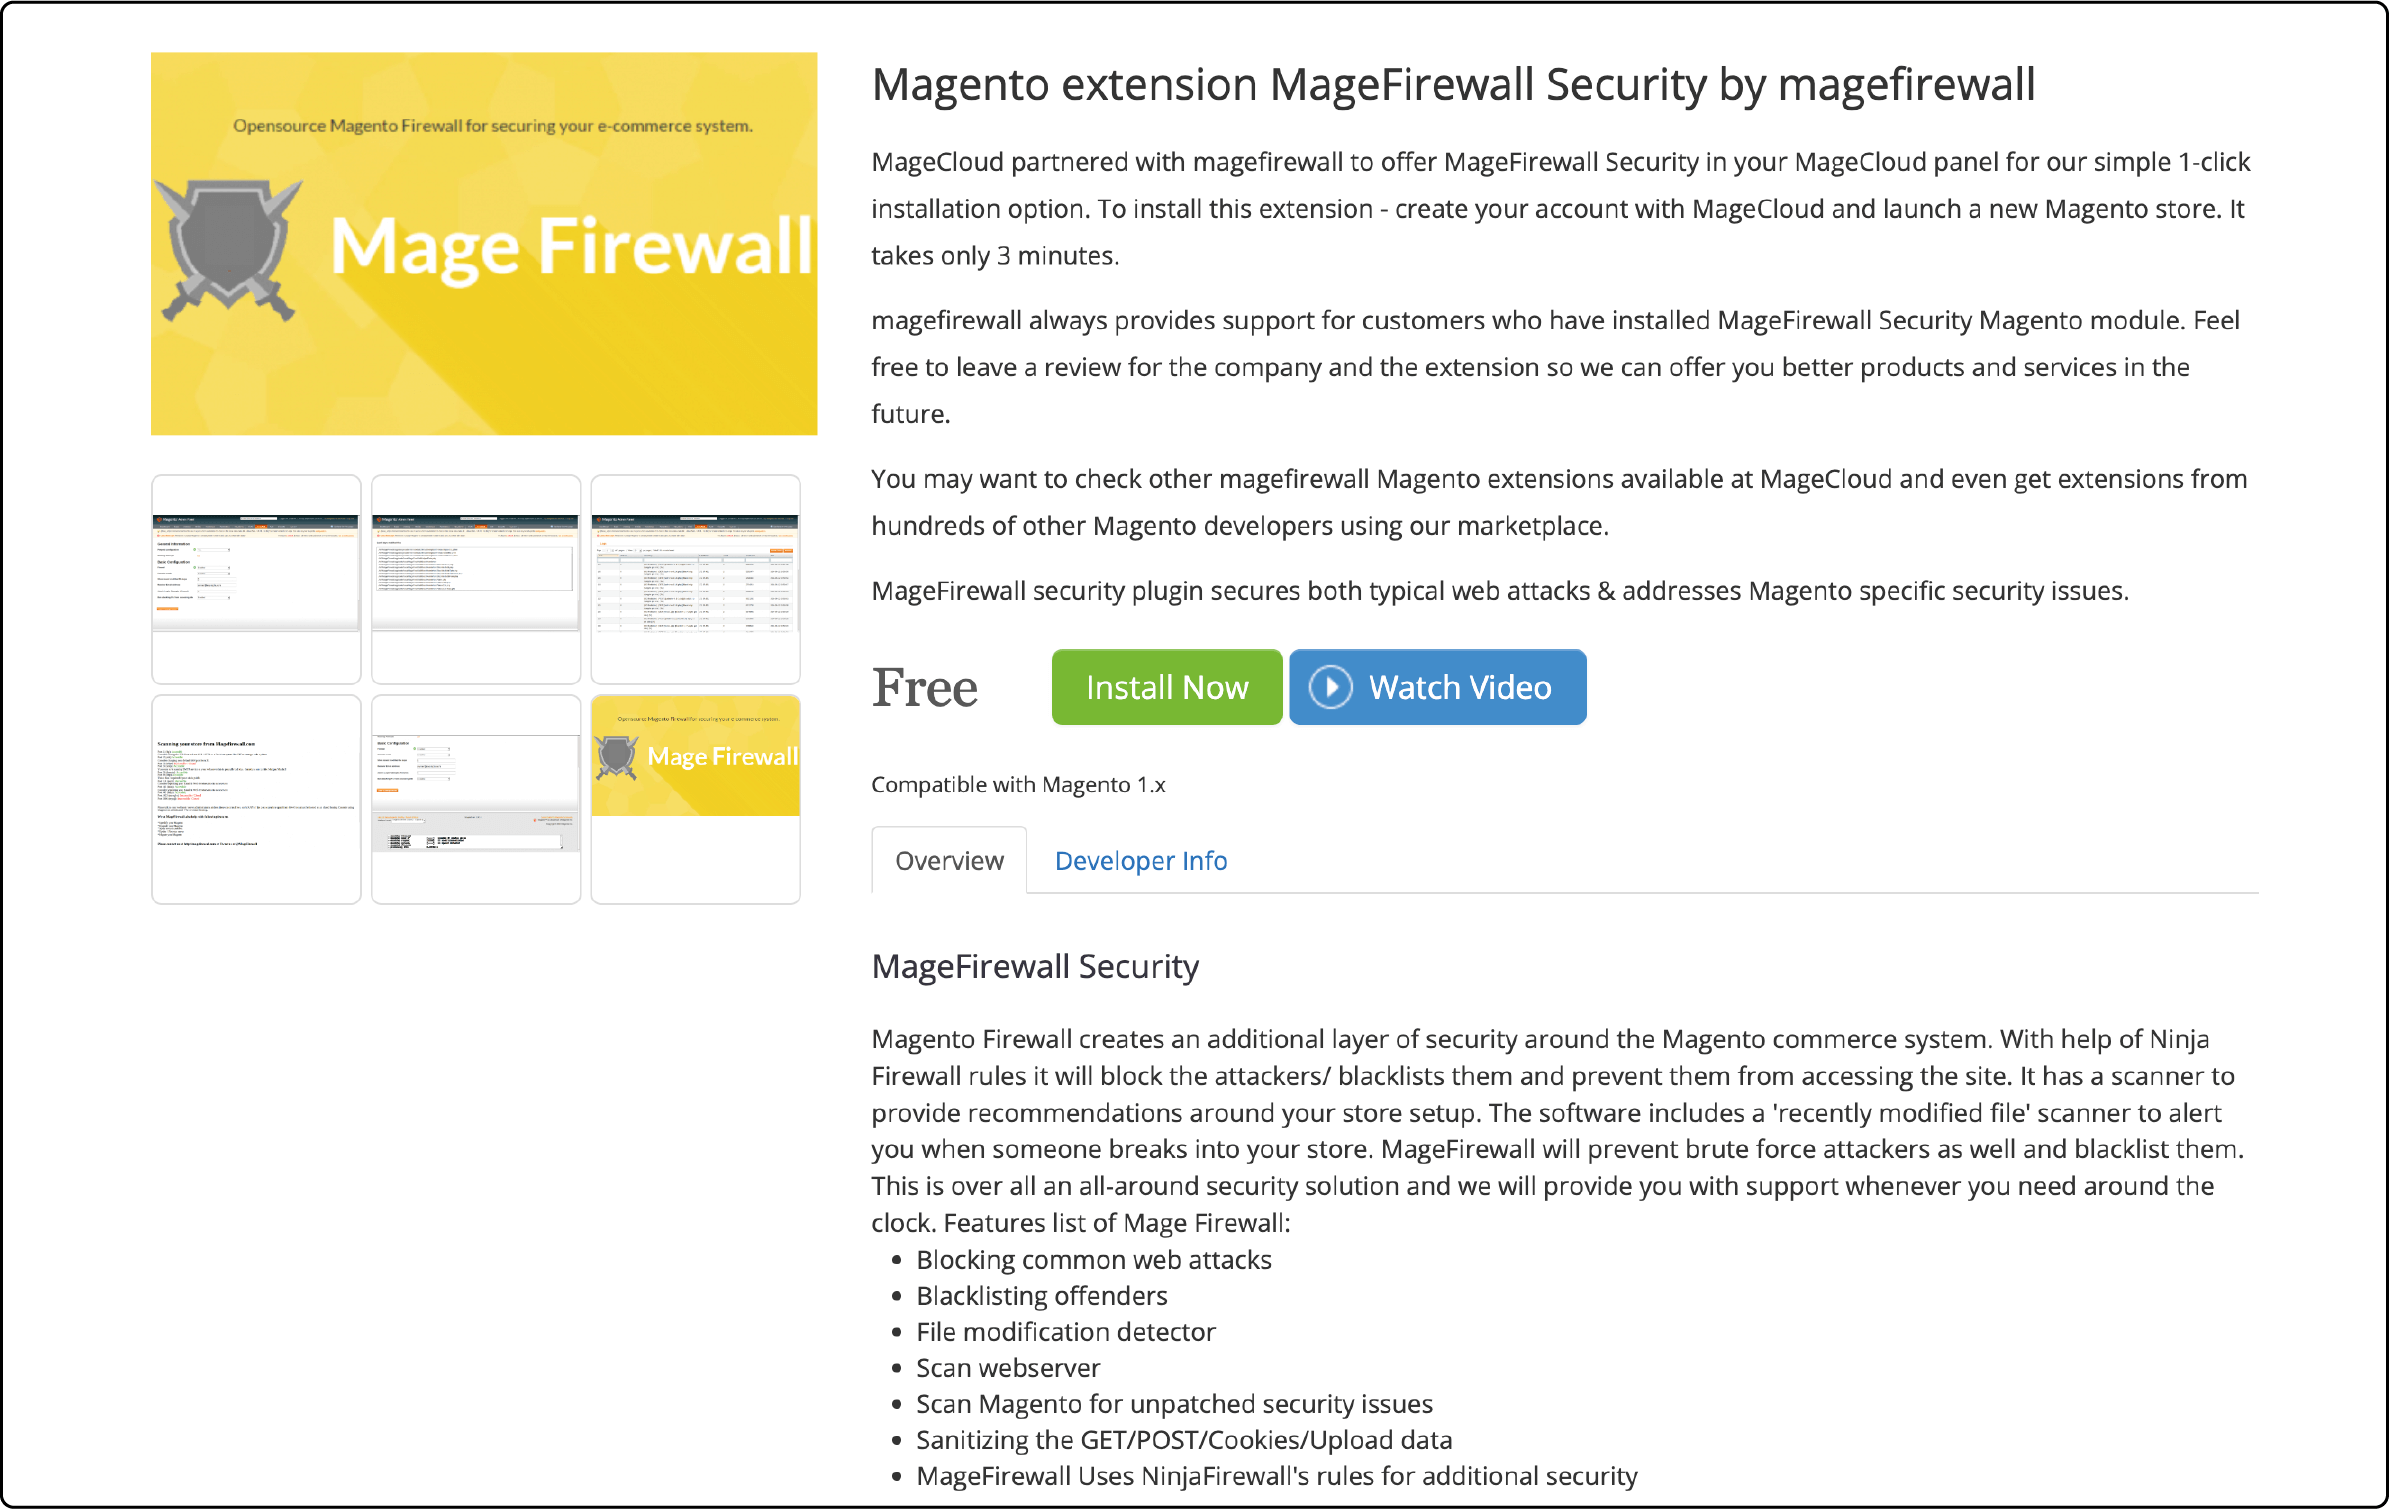 MageFirewall Security Suite for safeguarding Magento 2 stores